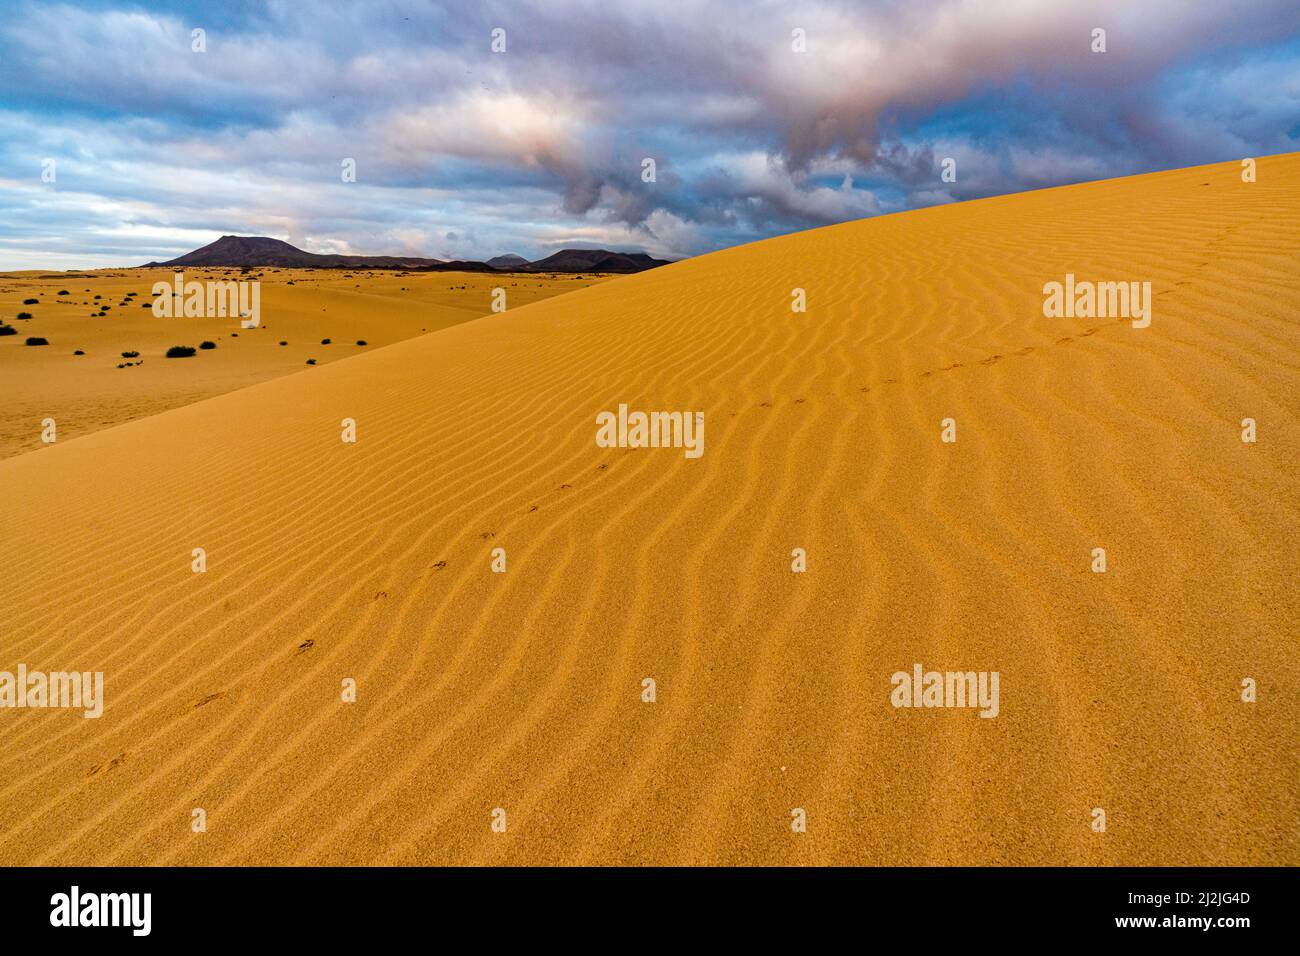 Cloudy sky at dawn over the rippled sand of desert dunes, Corralejo Natural Park, Fuerteventura, Canary Islands, Spain Stock Photo